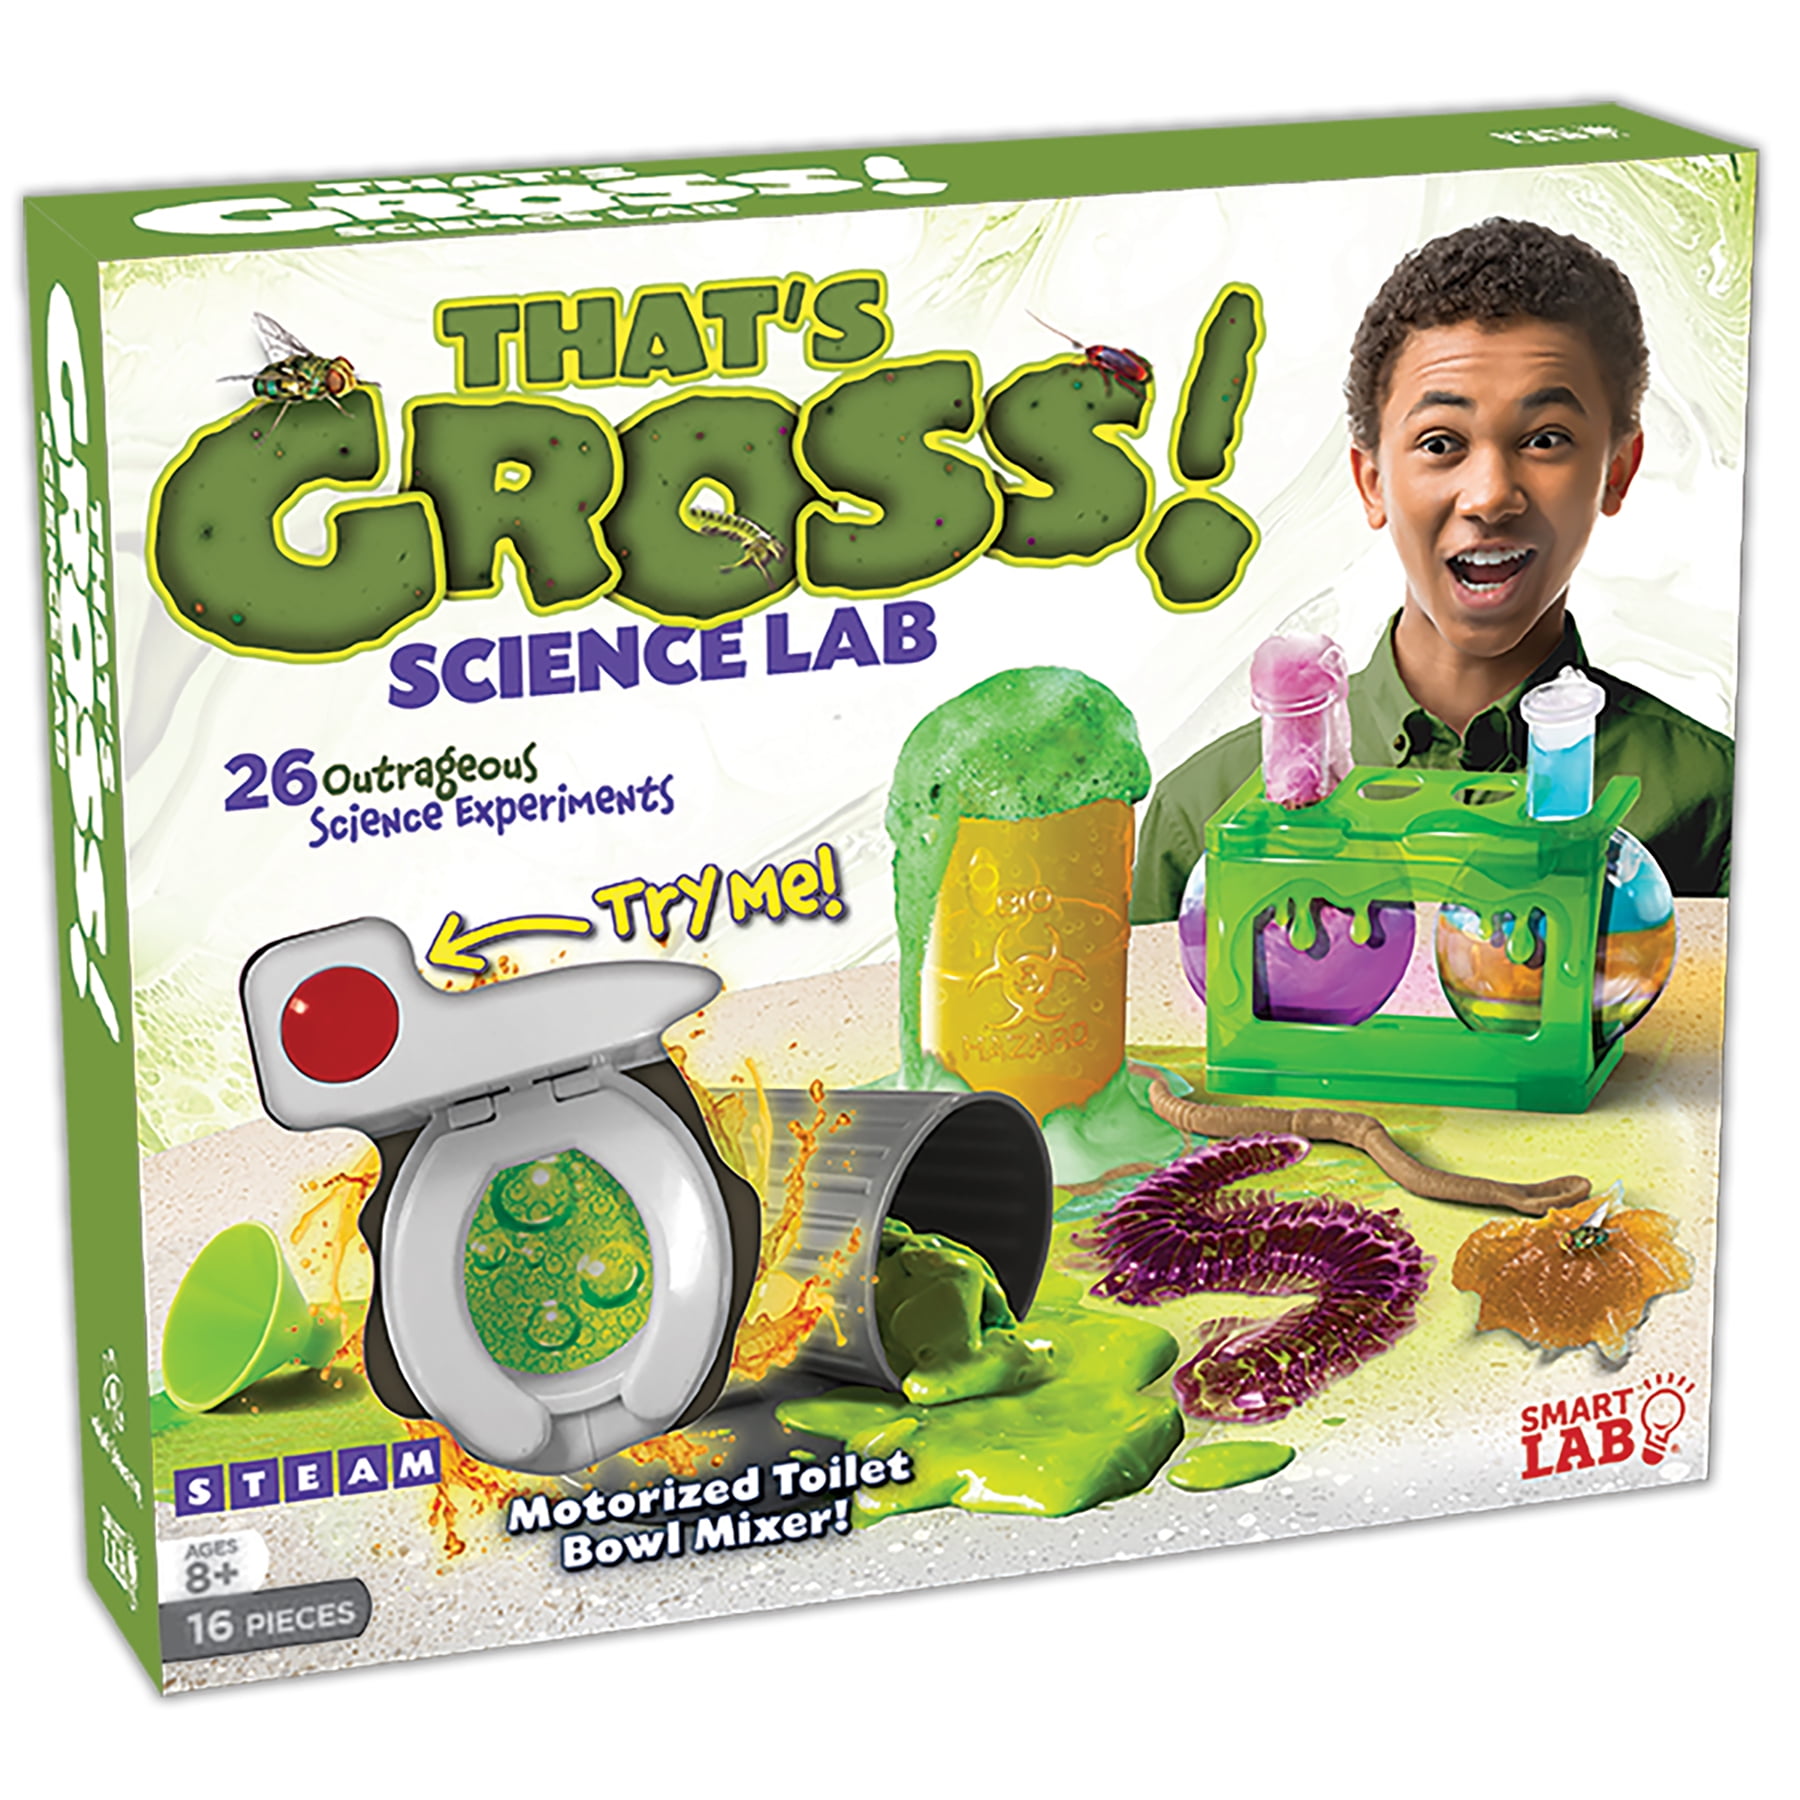 Scientific Explorer Sour Candy Factory Kit Science Playset for 8 Kids 0SA256 for sale online 